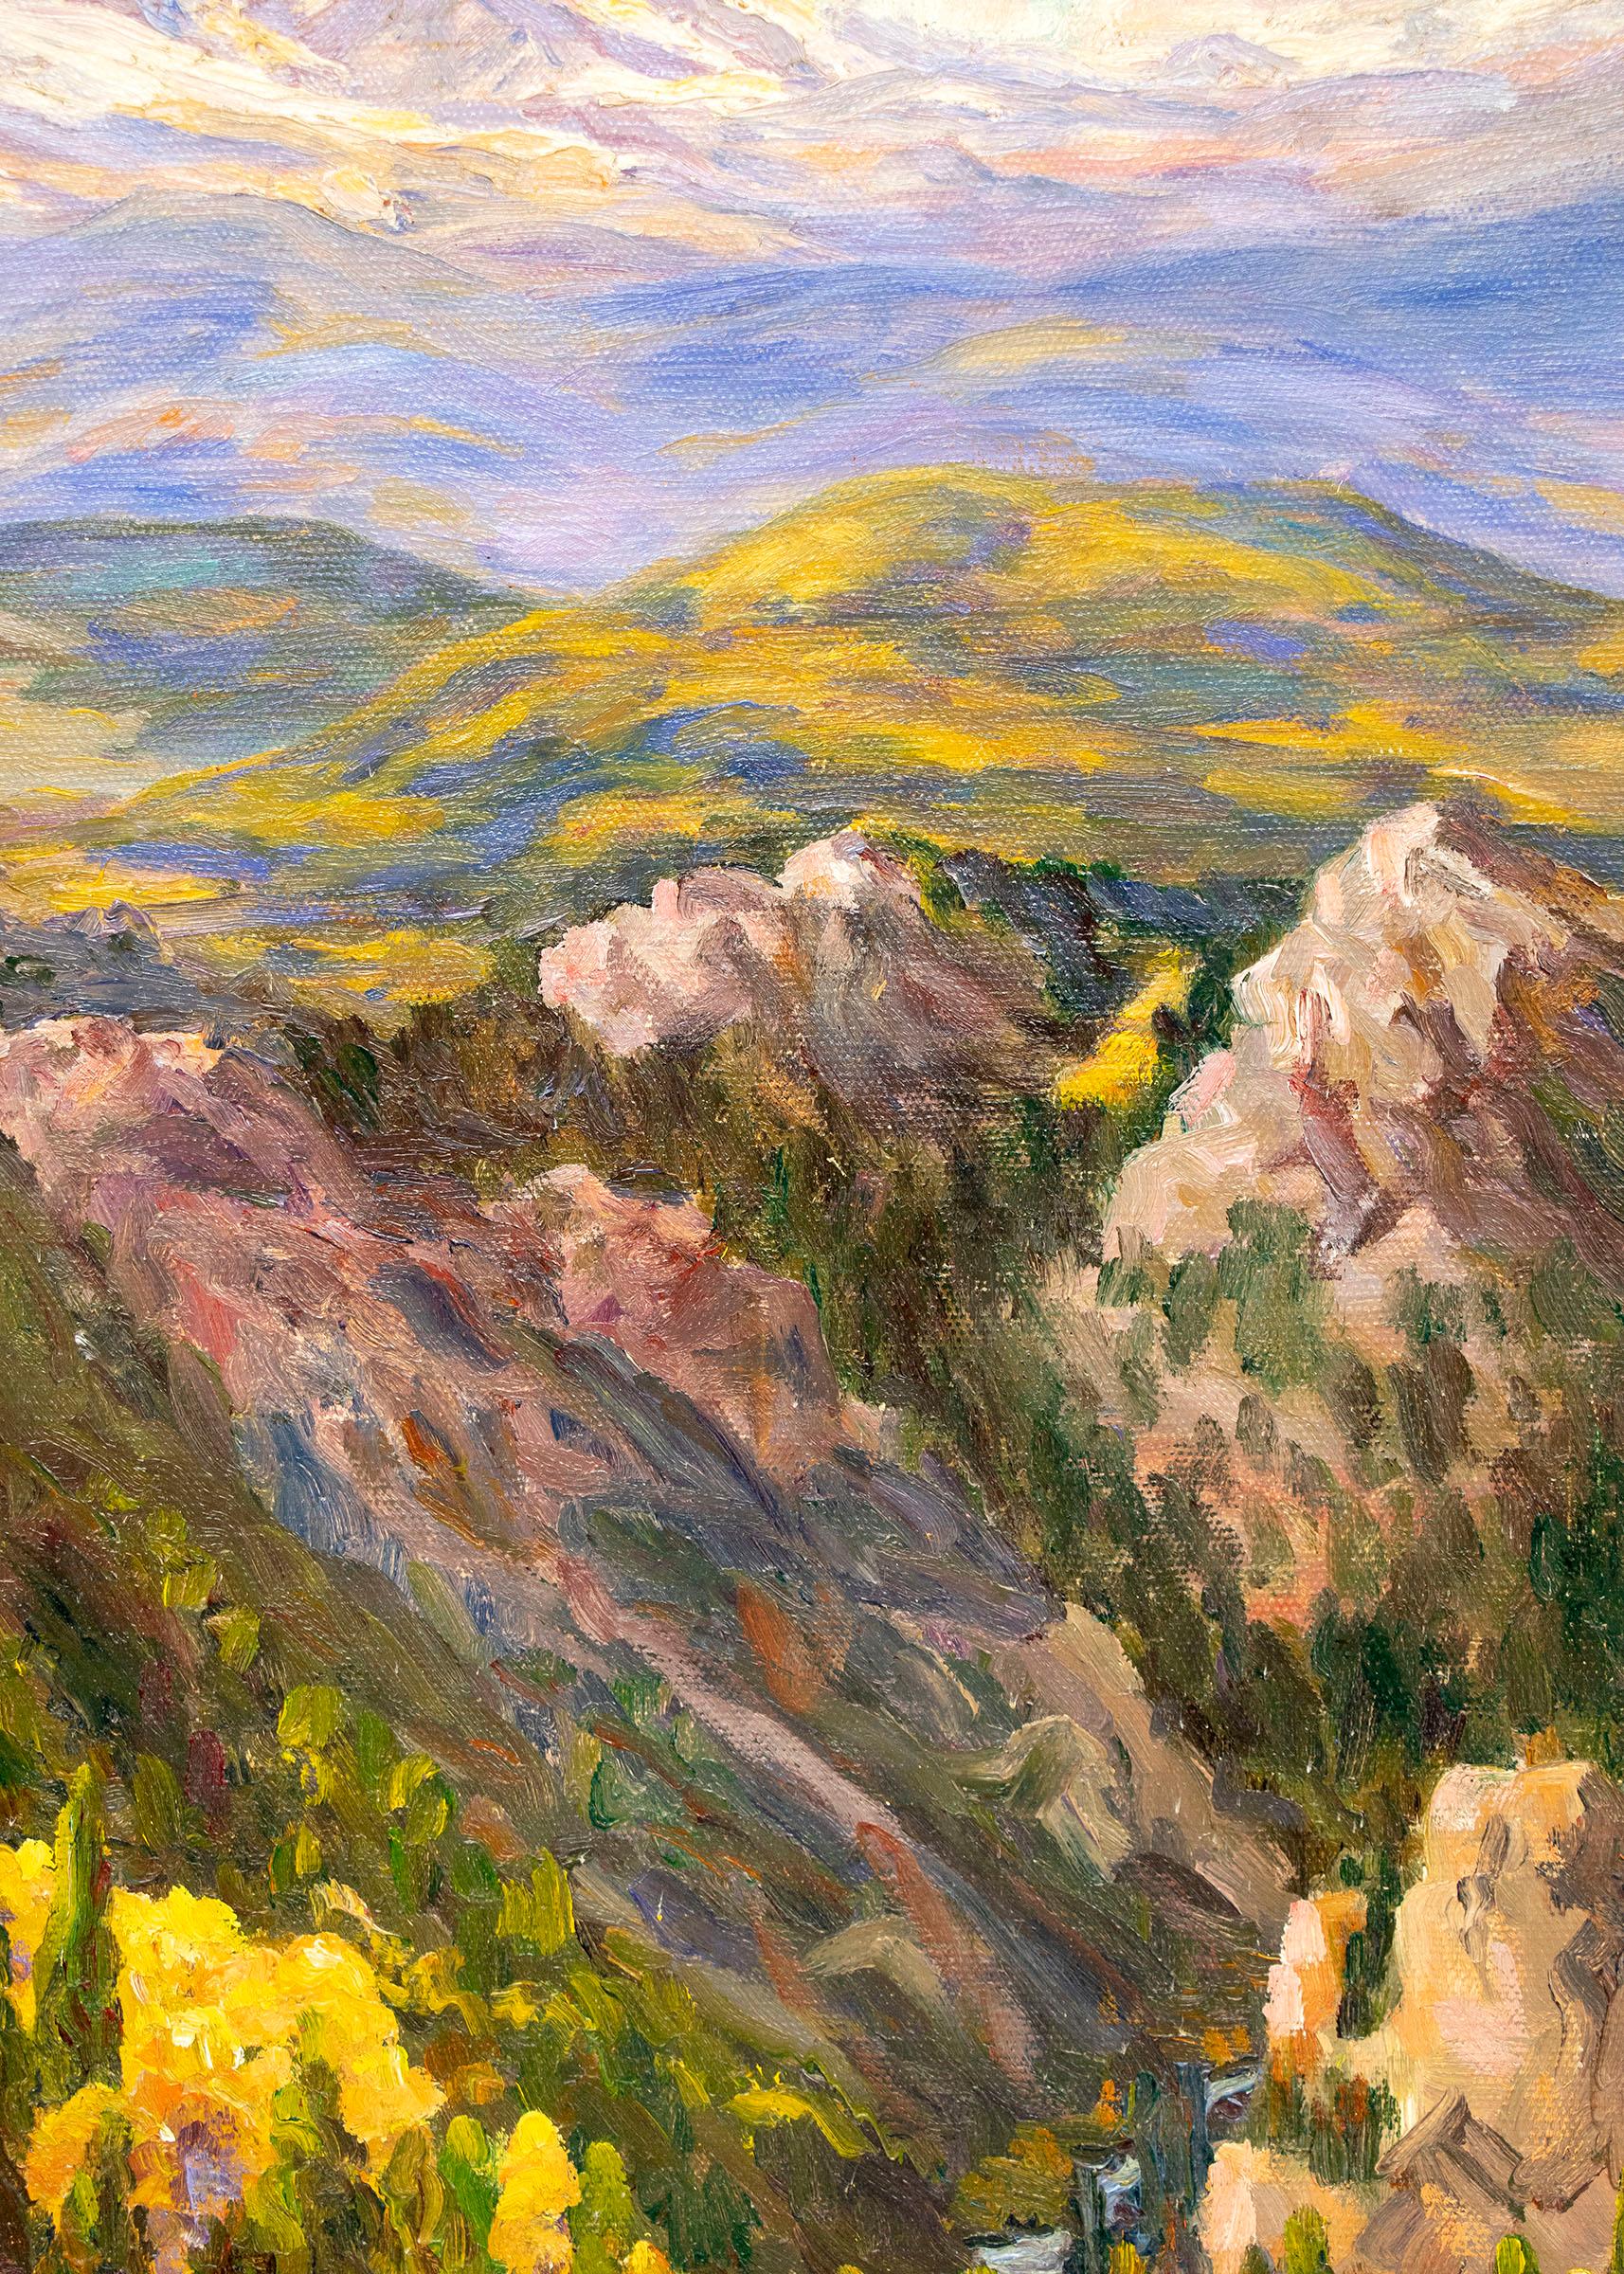 Boulder Canyon, Framed 1940s Colorado Mountain Landscape in Autumn with Aspens - American Impressionist Painting by Irene Fowler